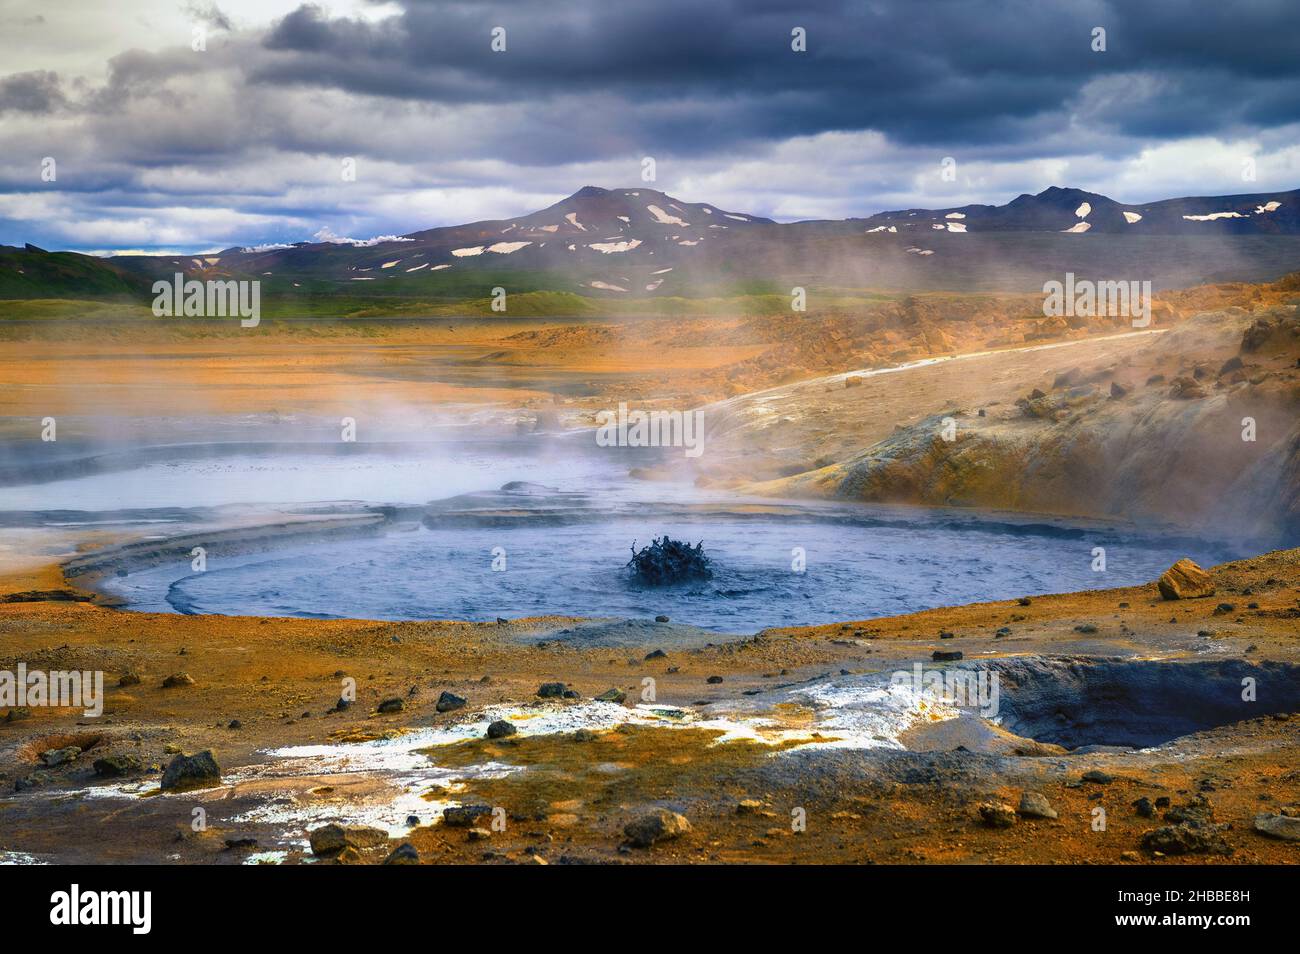 Steaming and bubbling mud pool in the Hverir geothermal area in Iceland Stock Photo